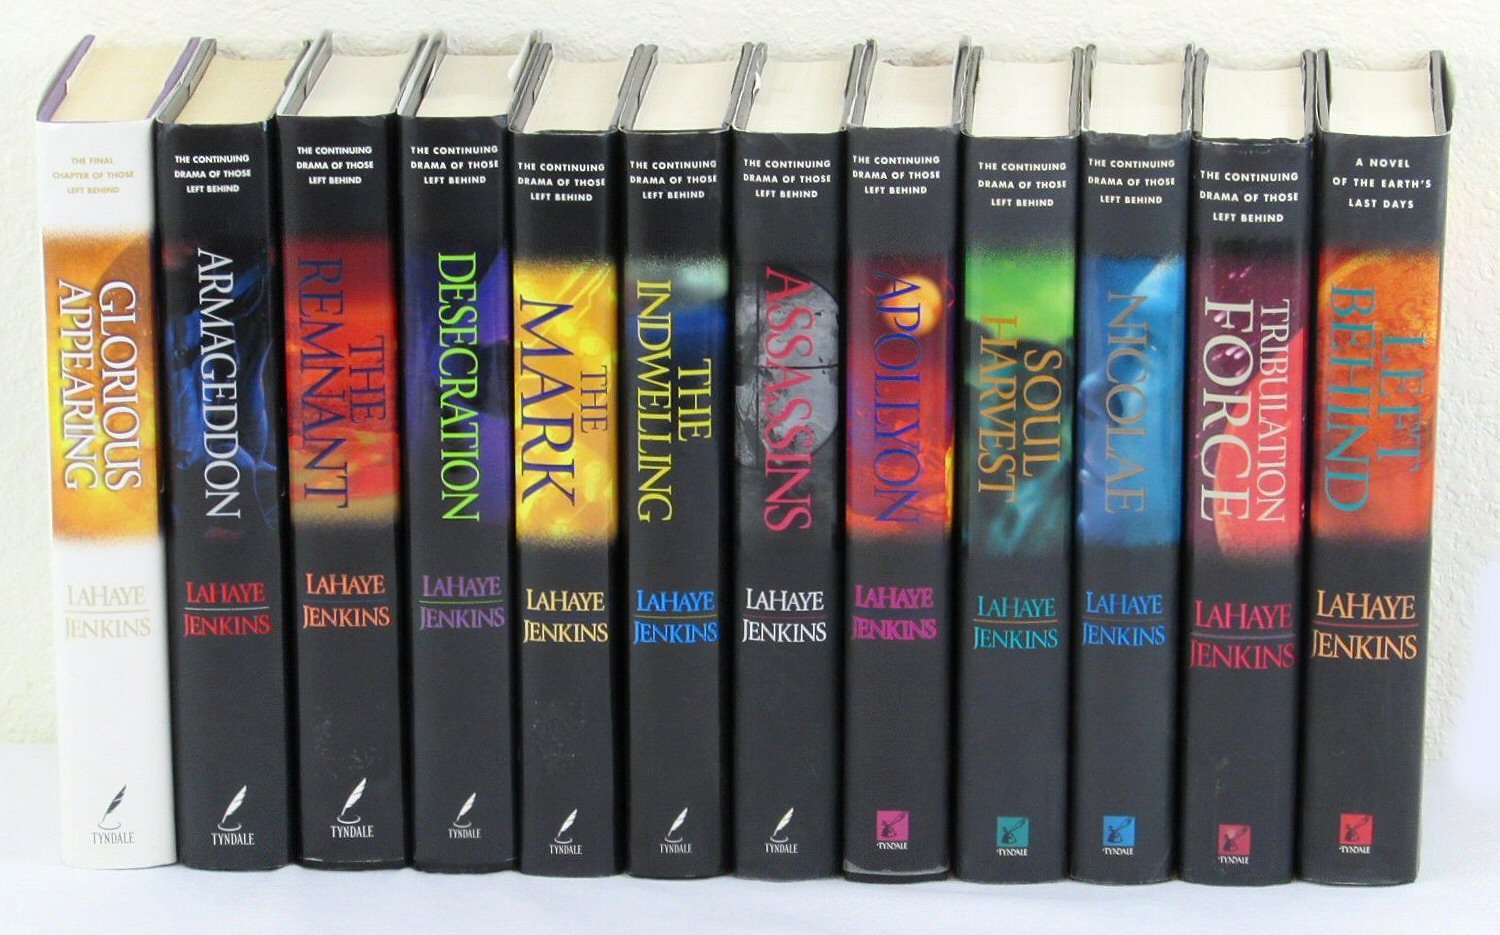 Spines of the books in the Left Behind series